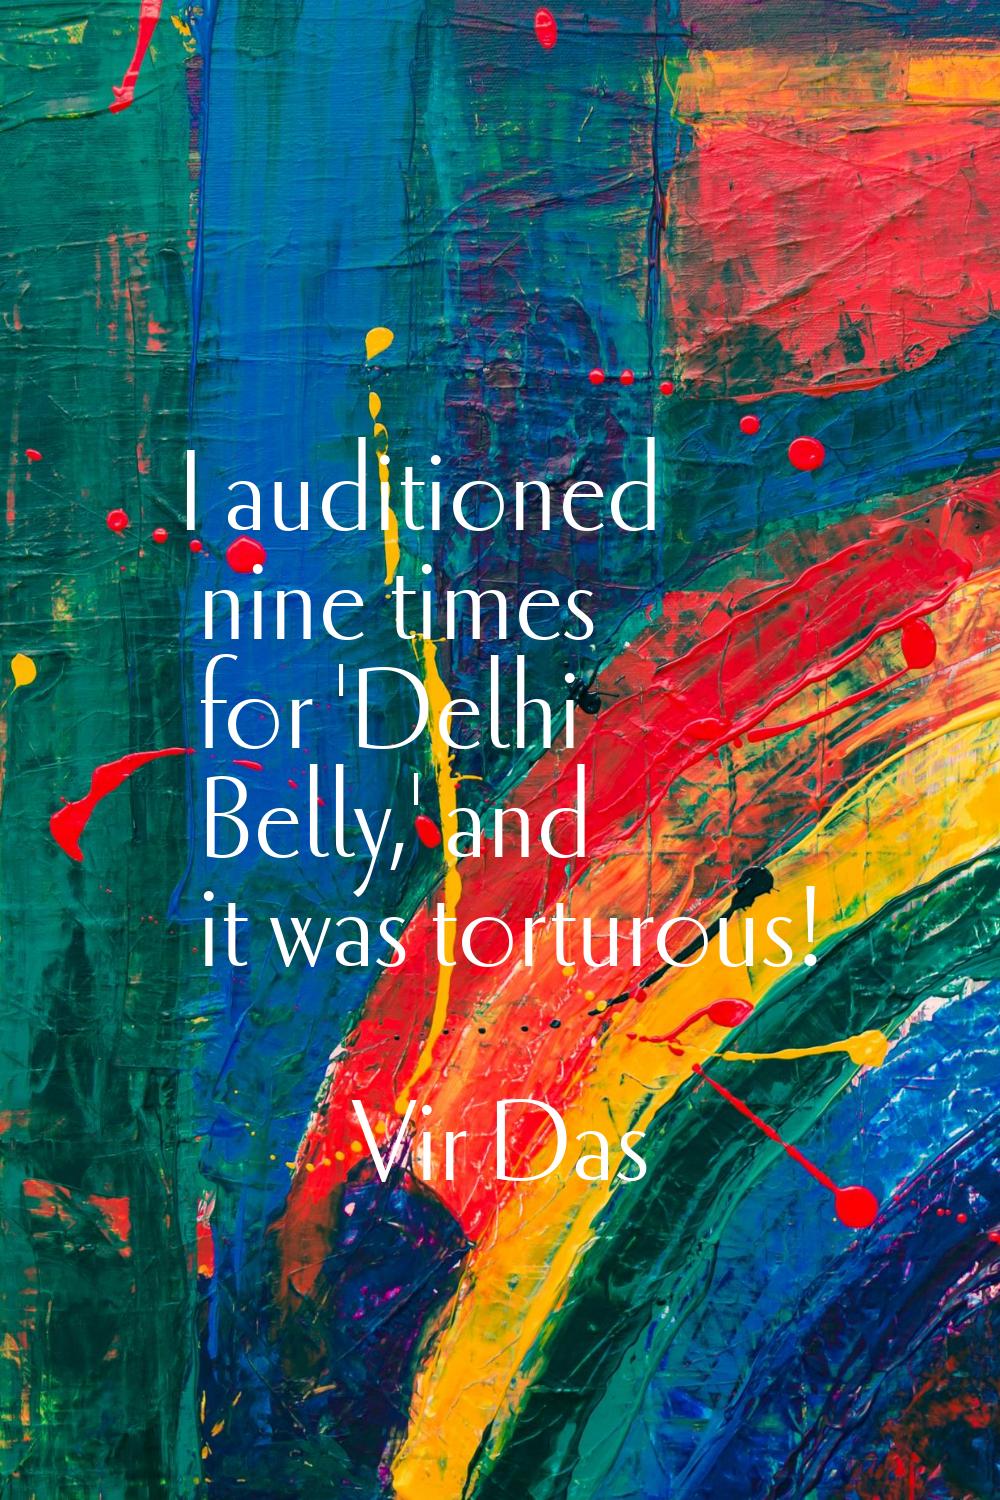 I auditioned nine times for 'Delhi Belly,' and it was torturous!